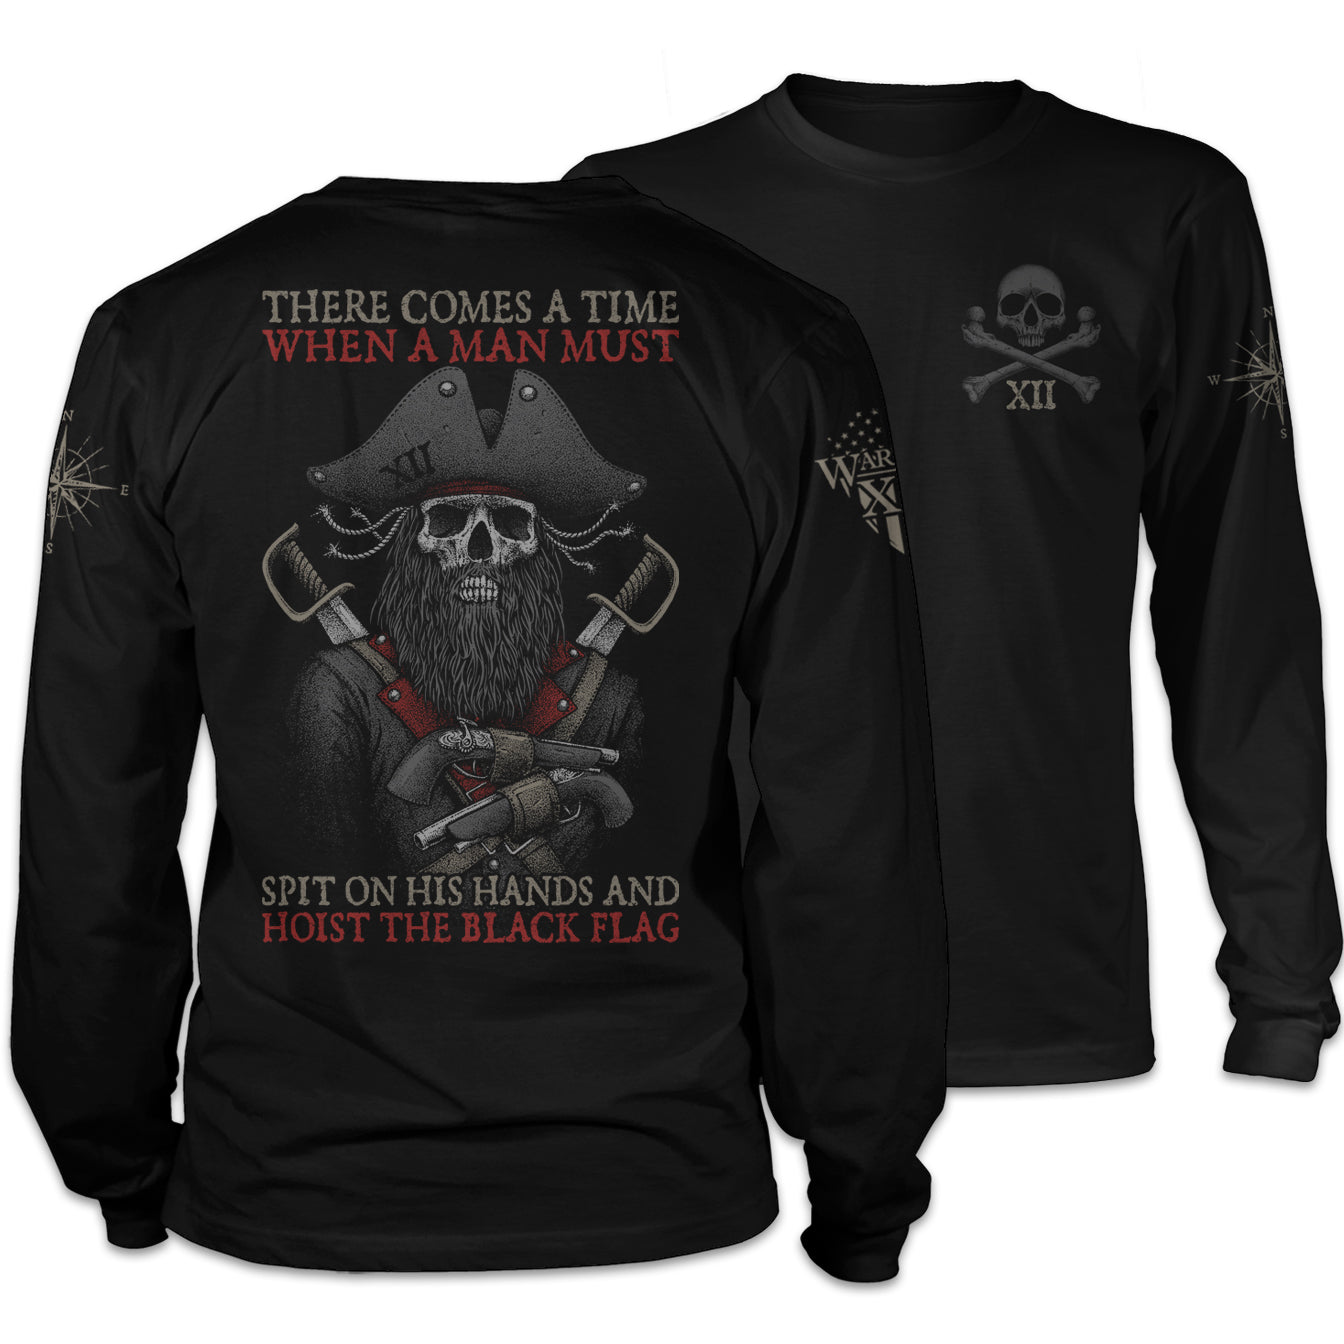 Front & back black long sleeve shirt with the words "There comes a time when a man must spit on his hands and hoist the black flag" with the skull of blackbeard printed on the shirt.